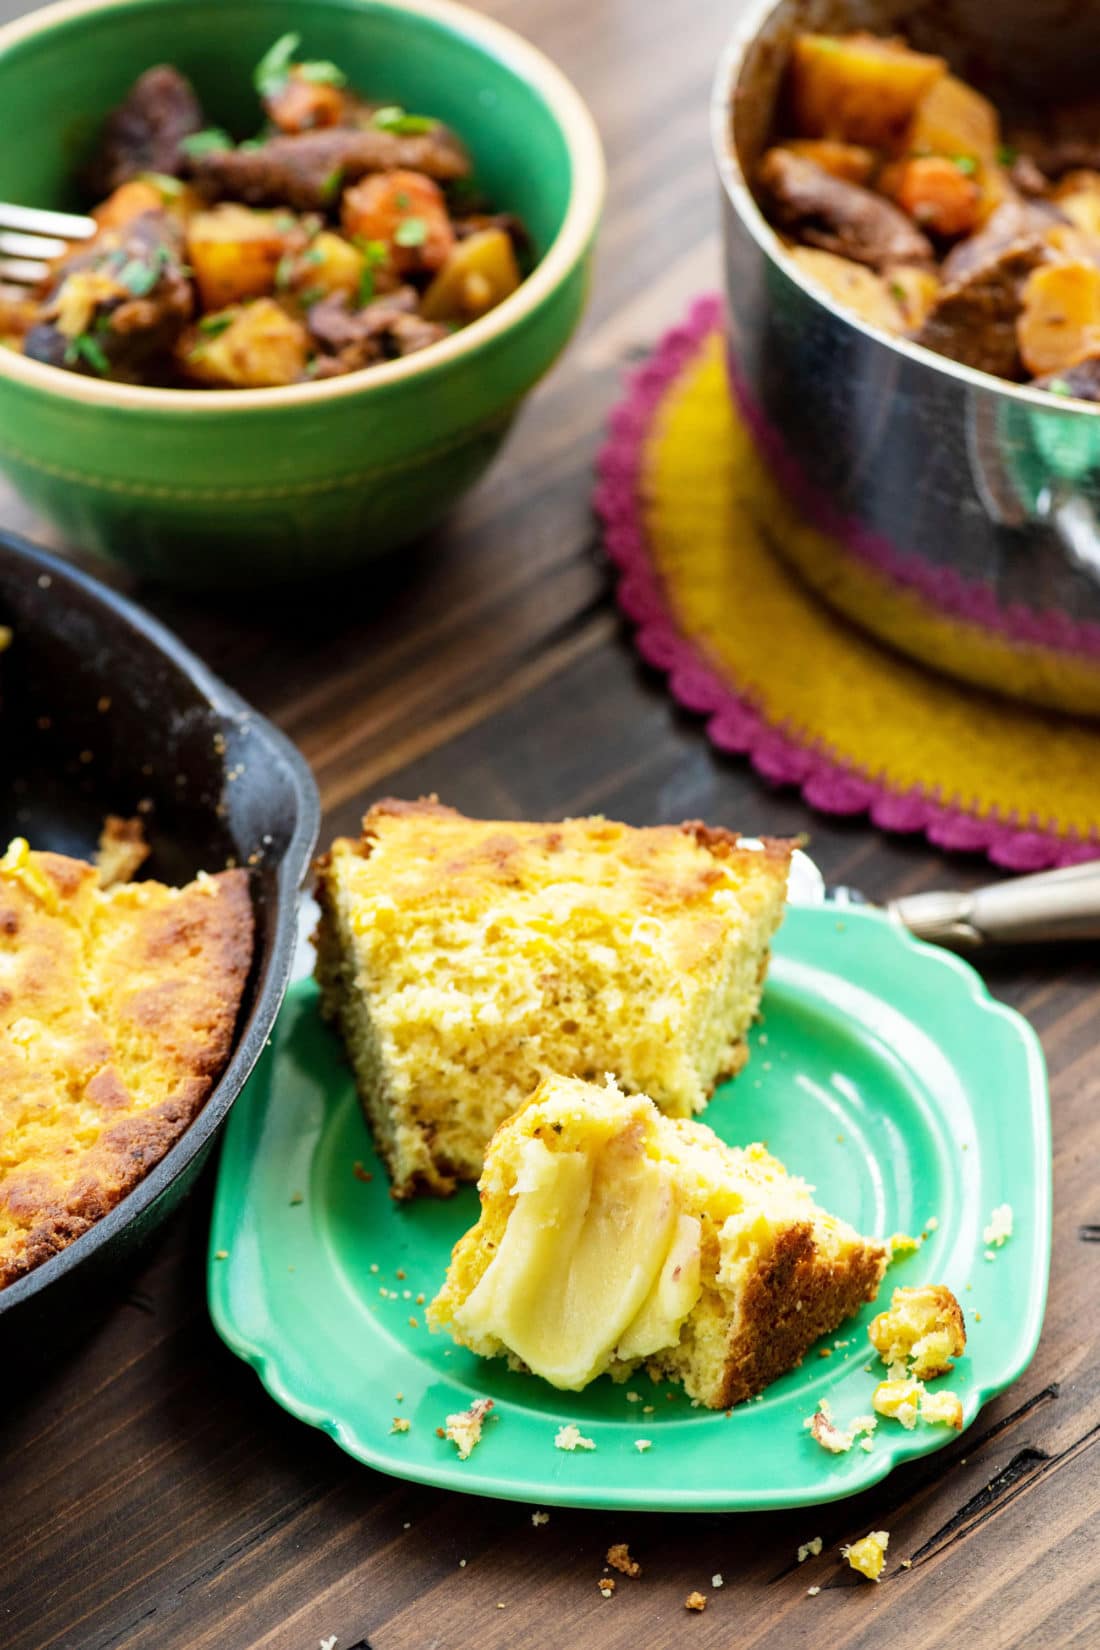 Cornbread with Apple Cider Beef Stew in the background